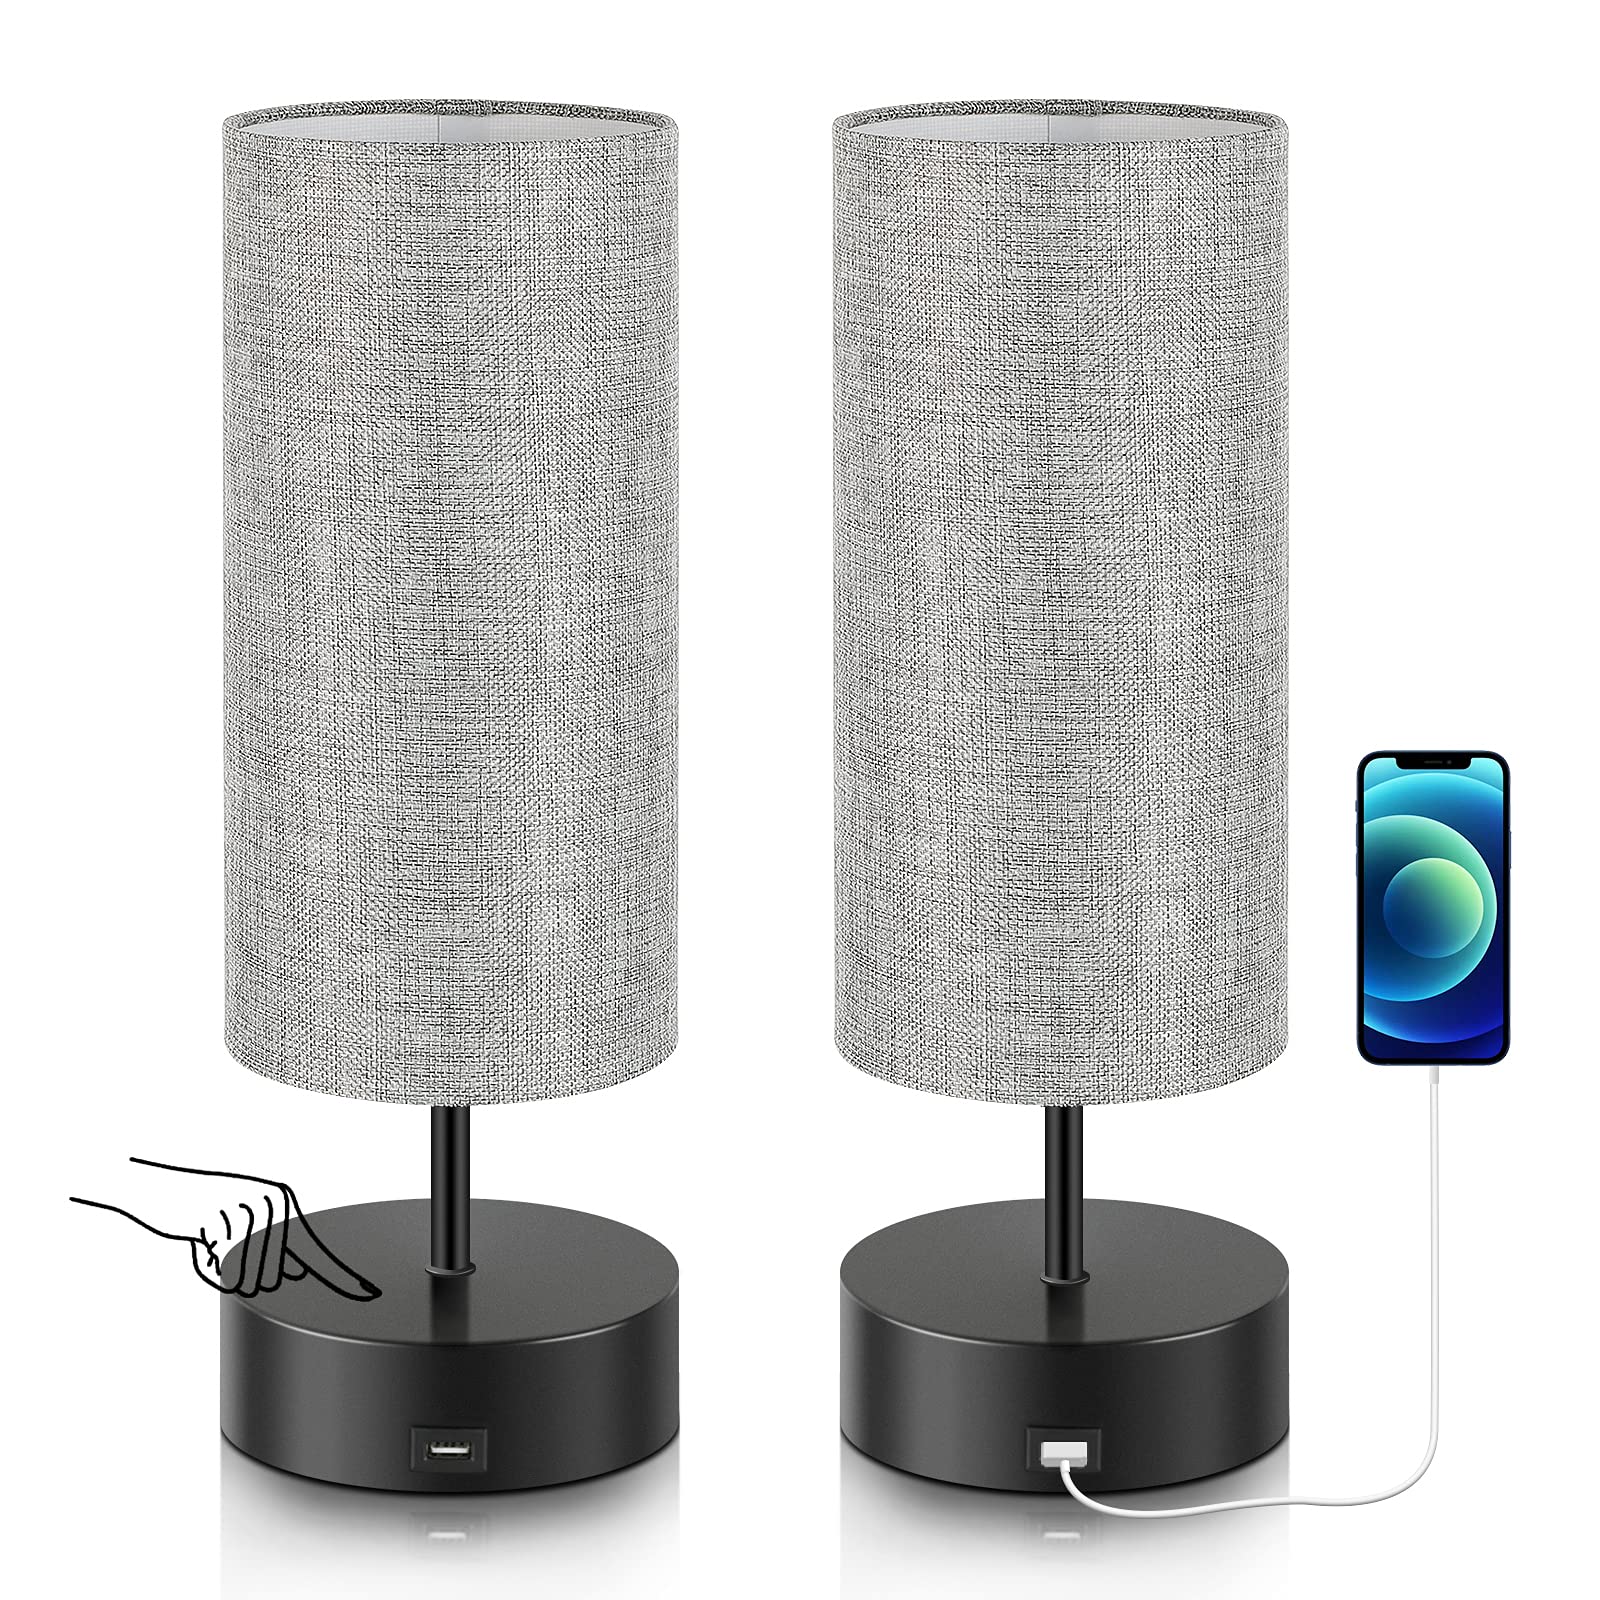 xydled Touch Control Table Lamp with USB Charging Port, Set of 2 3-Way Dimmable Modern Bedside Lamps Gray Linen Nightstand Lights for Bedroom Livin...